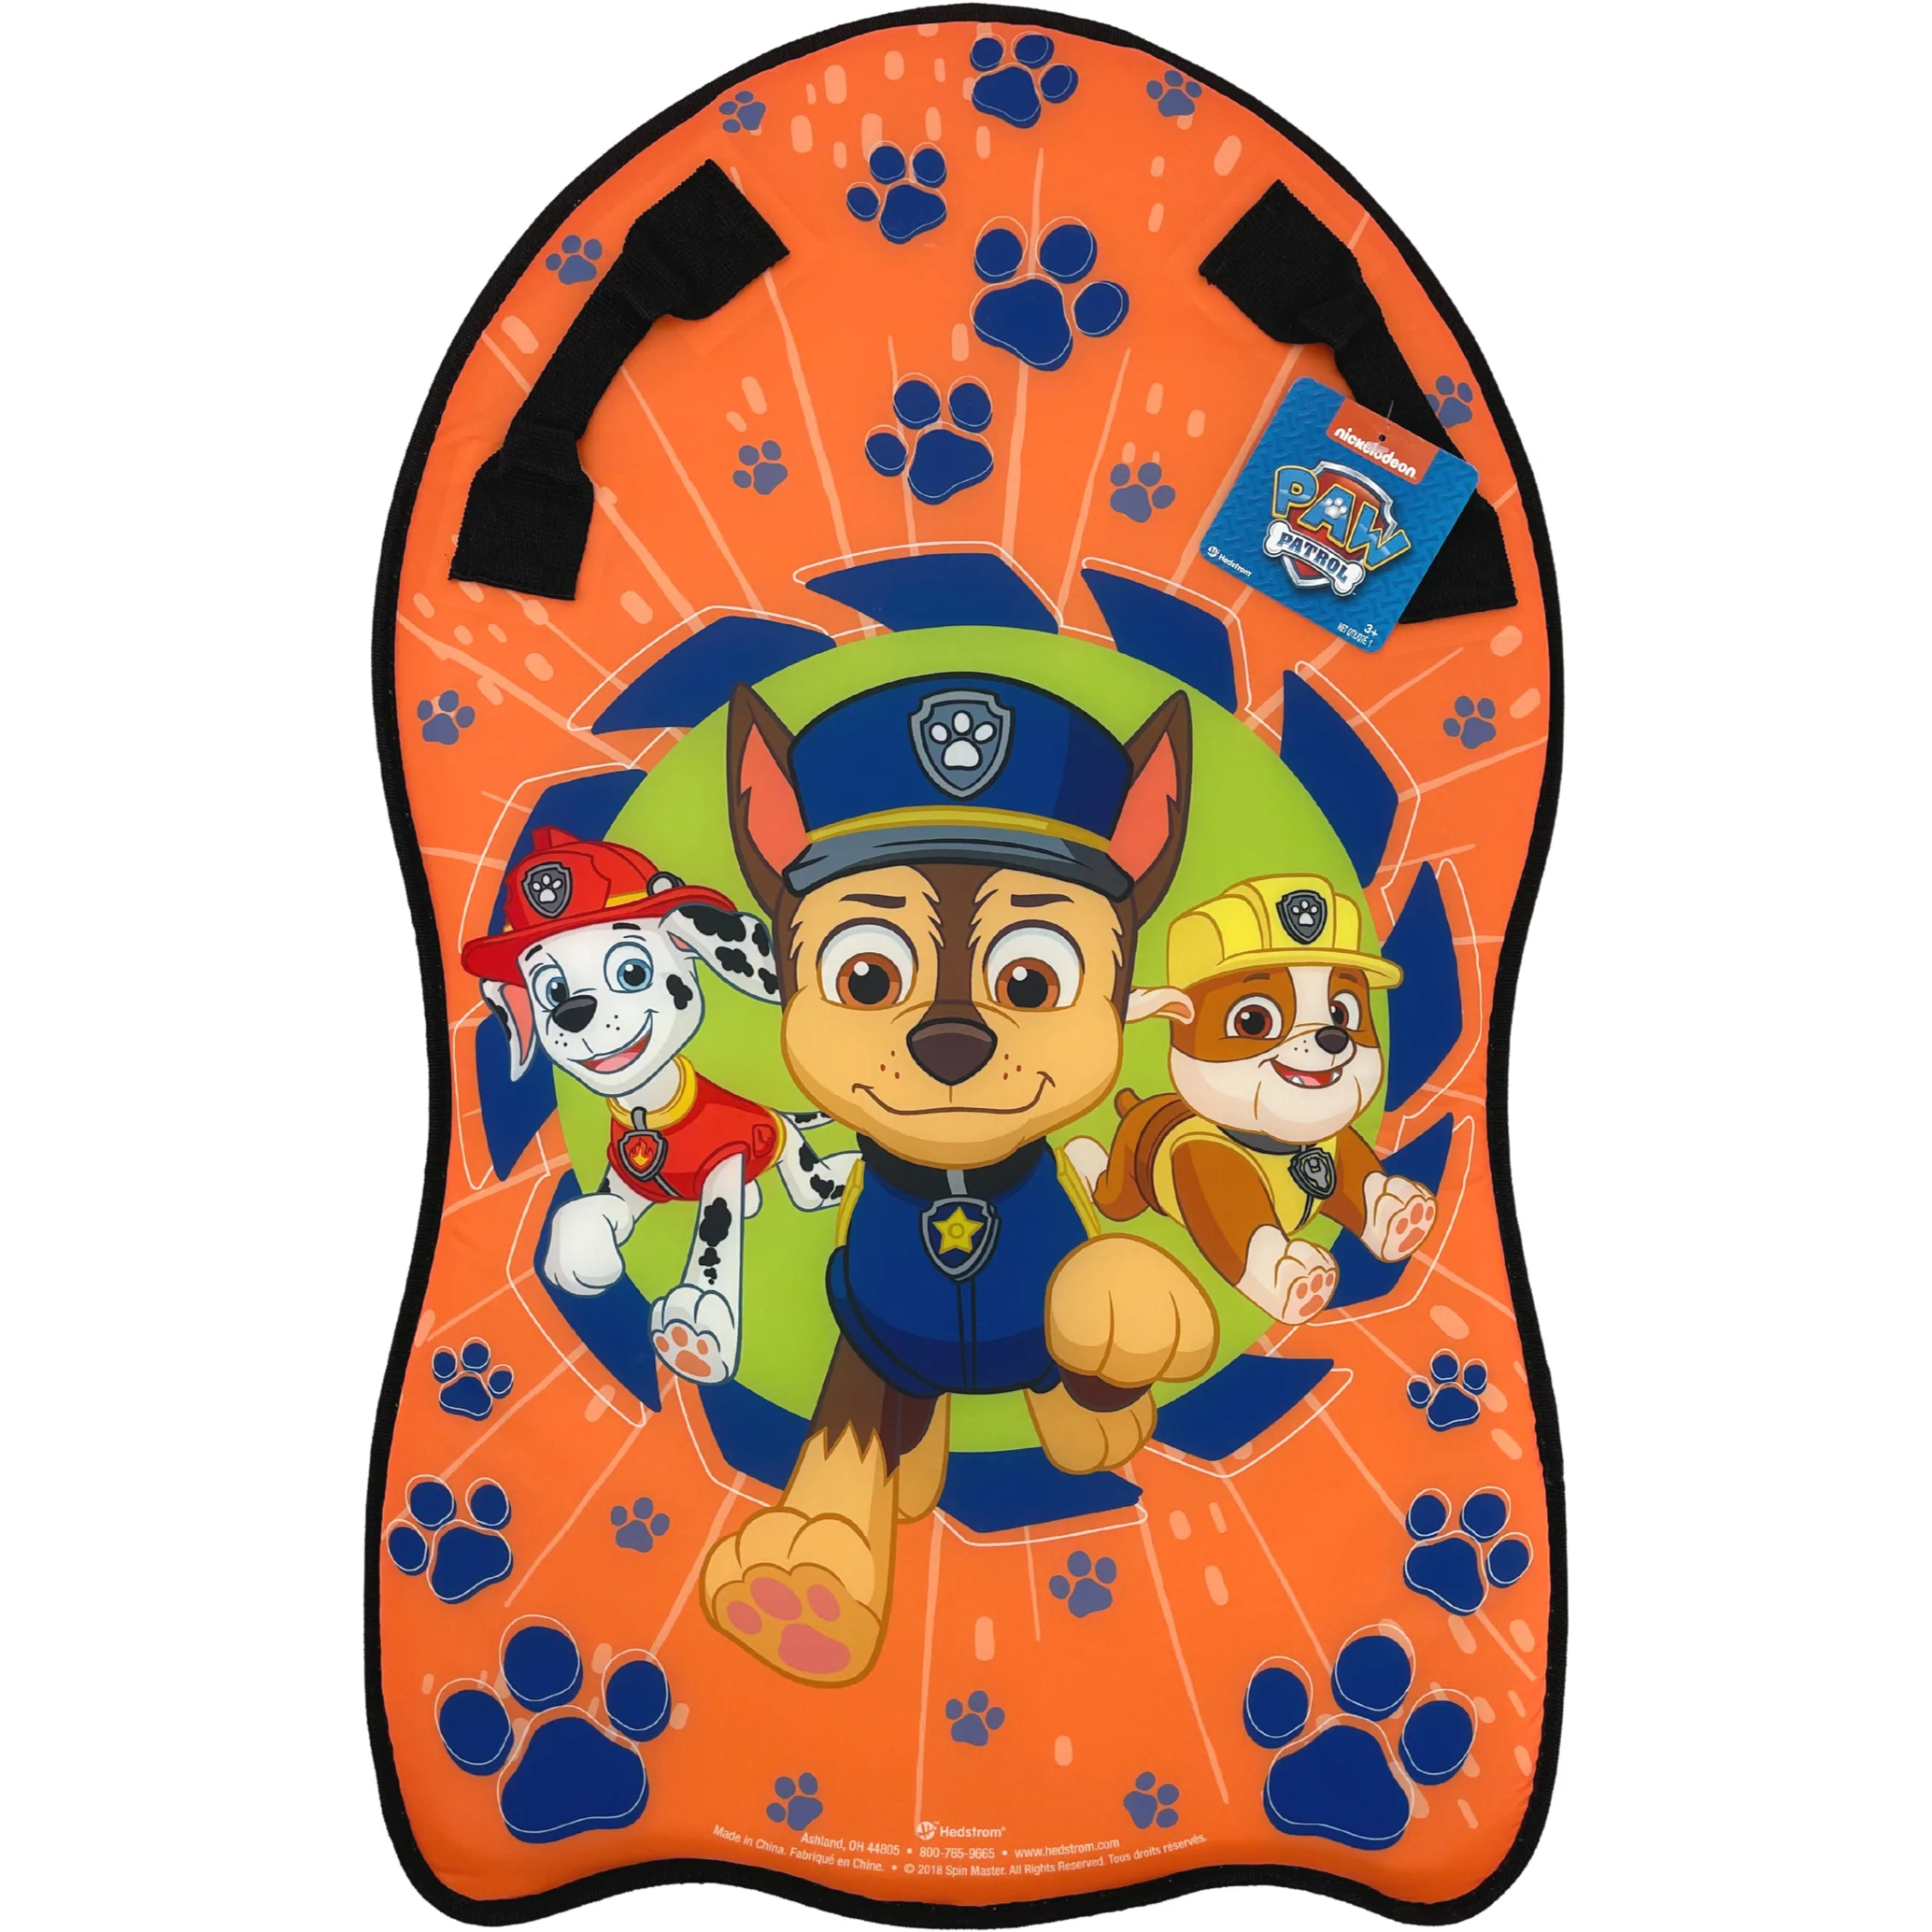 Nickelodeon Paw Patrol Kid's Sled / Shaped Sno Speedster / Outdoor Winter Activity / Chase, Marshall & Rubble